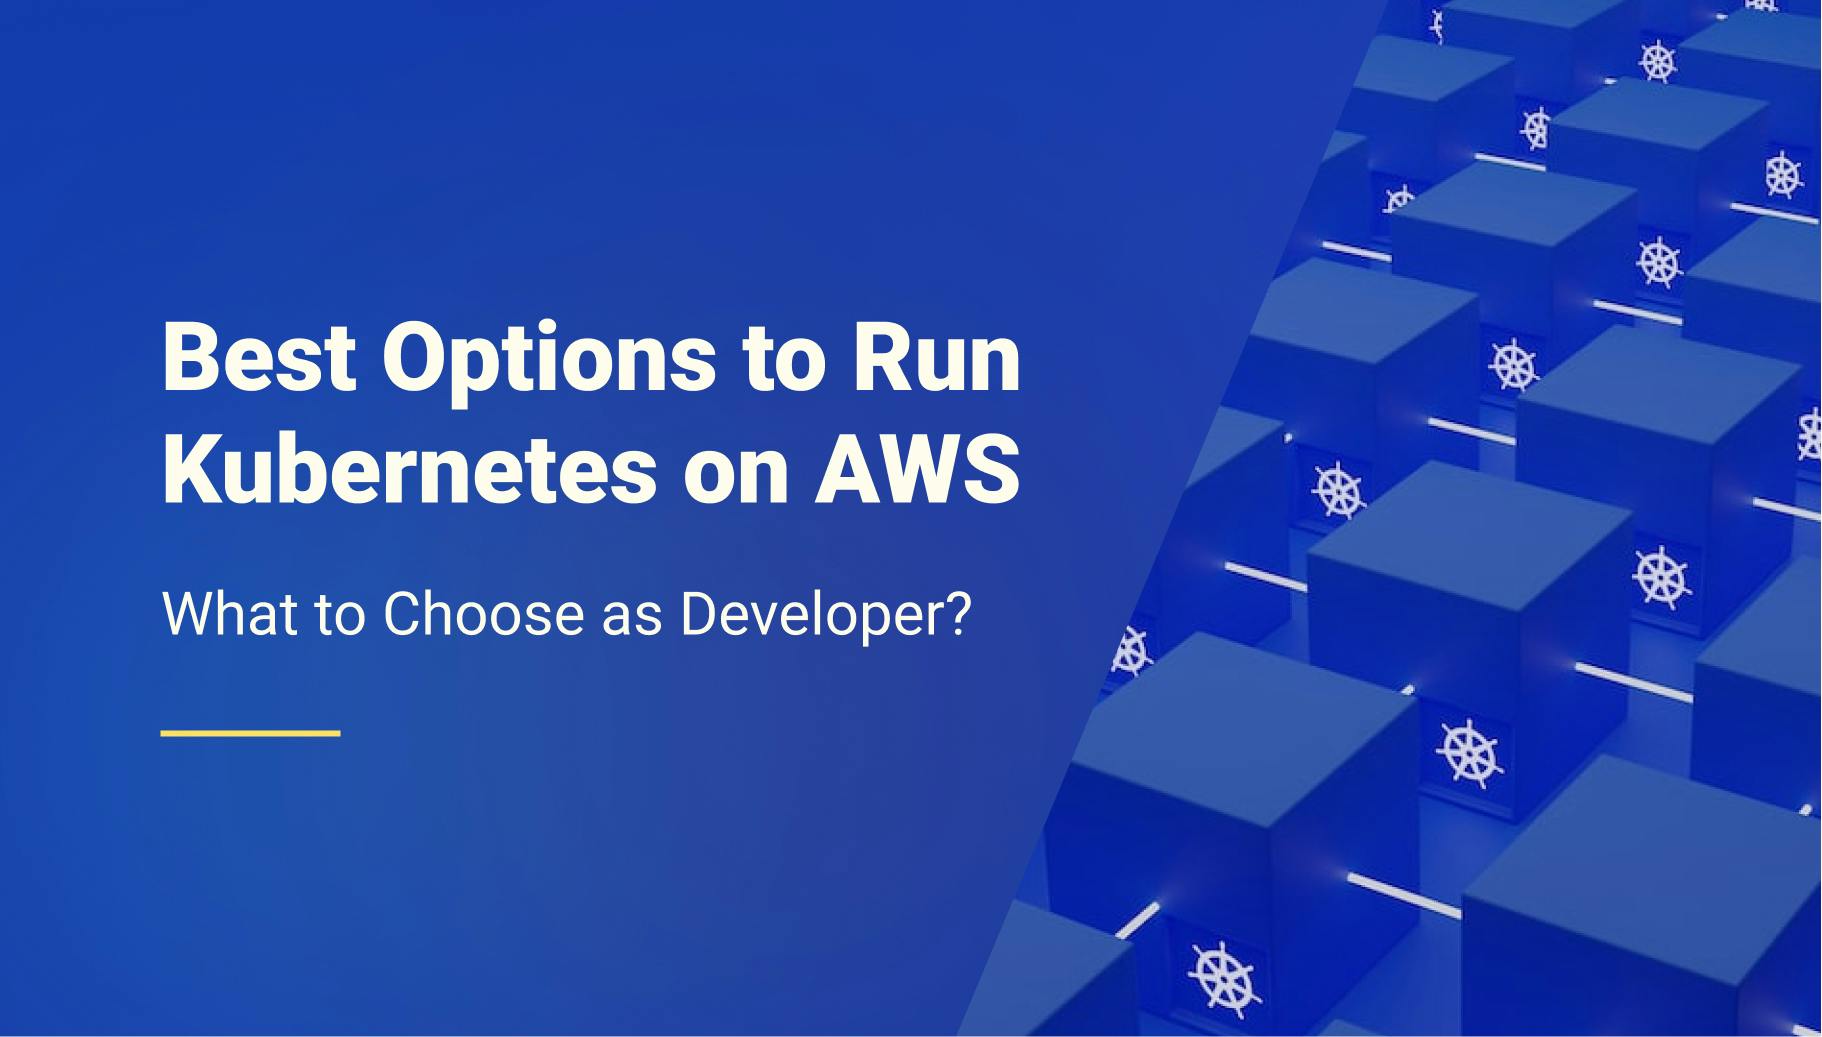 Choosing the Best Options to Run Kubernetes on AWS in 2023 - Qovery